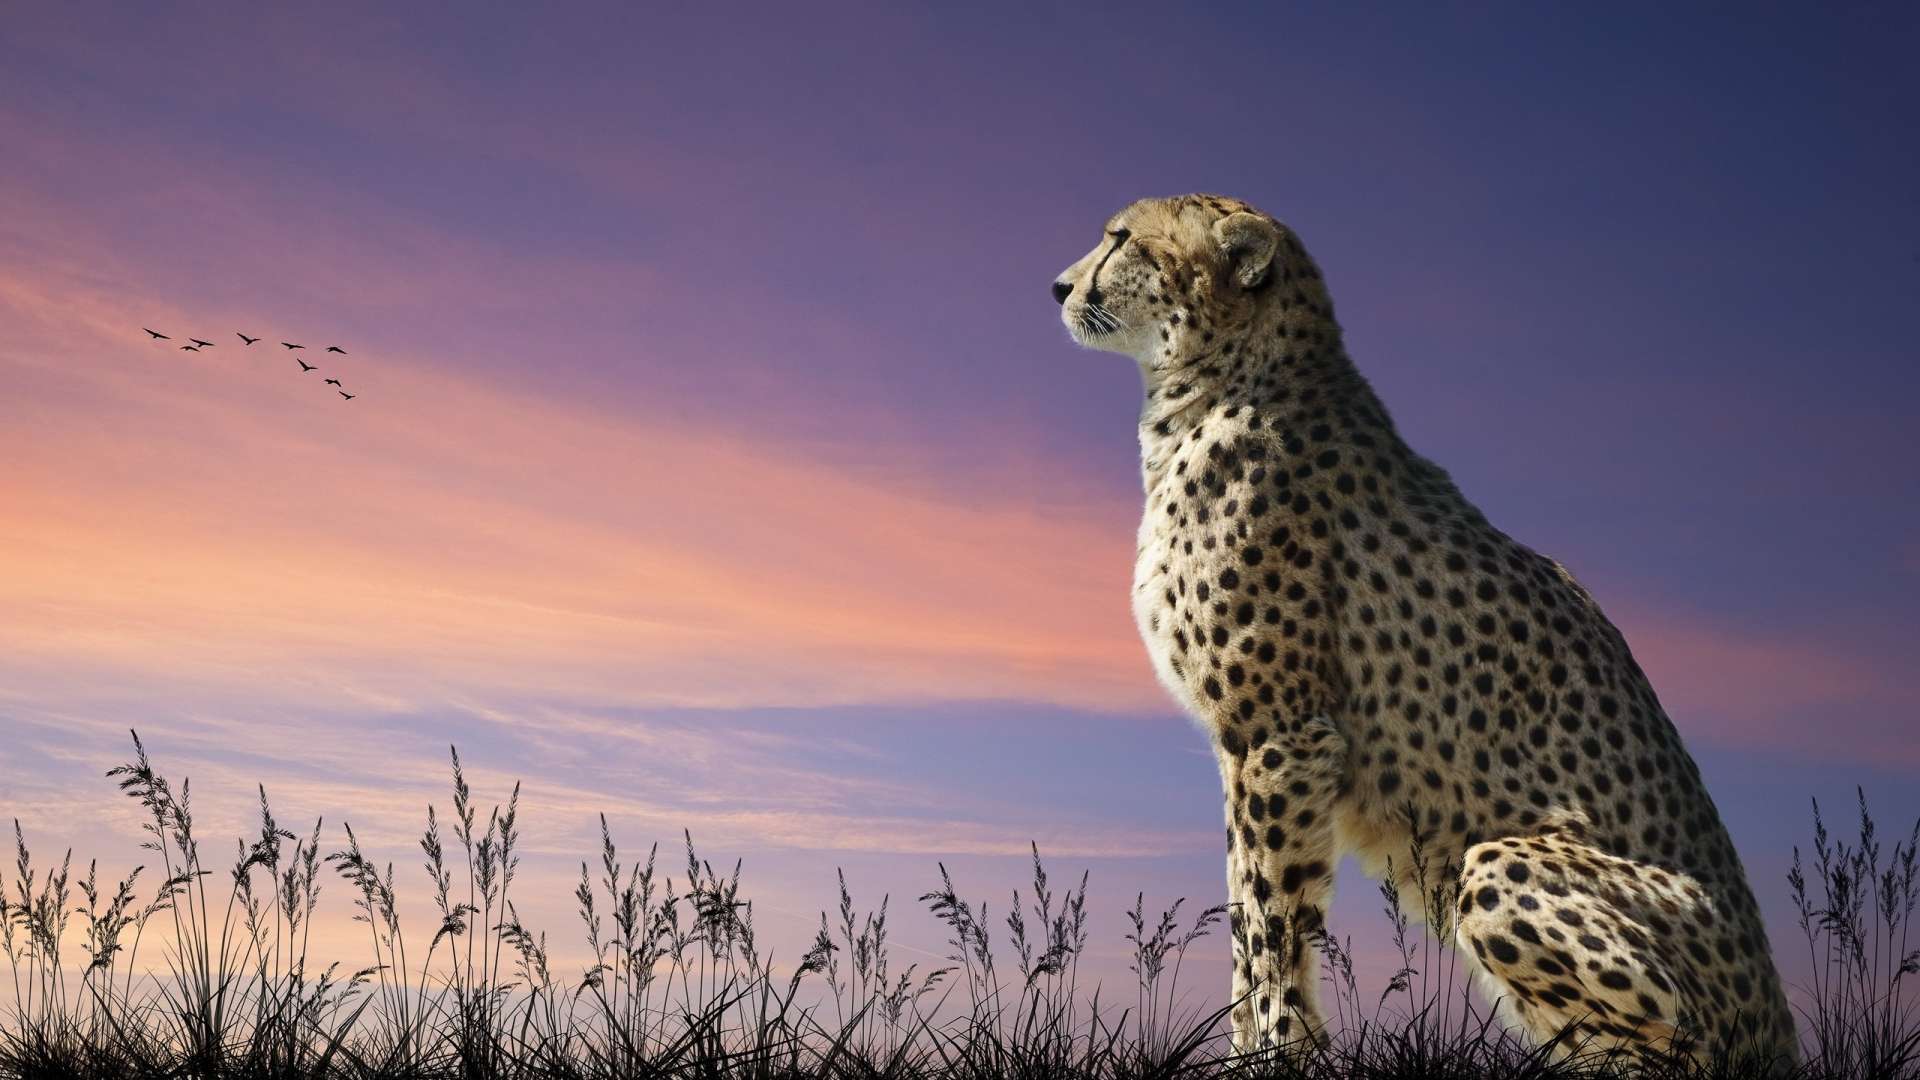 Cheetah HD Wallpaper Is A Fantastic For Your Pc And It